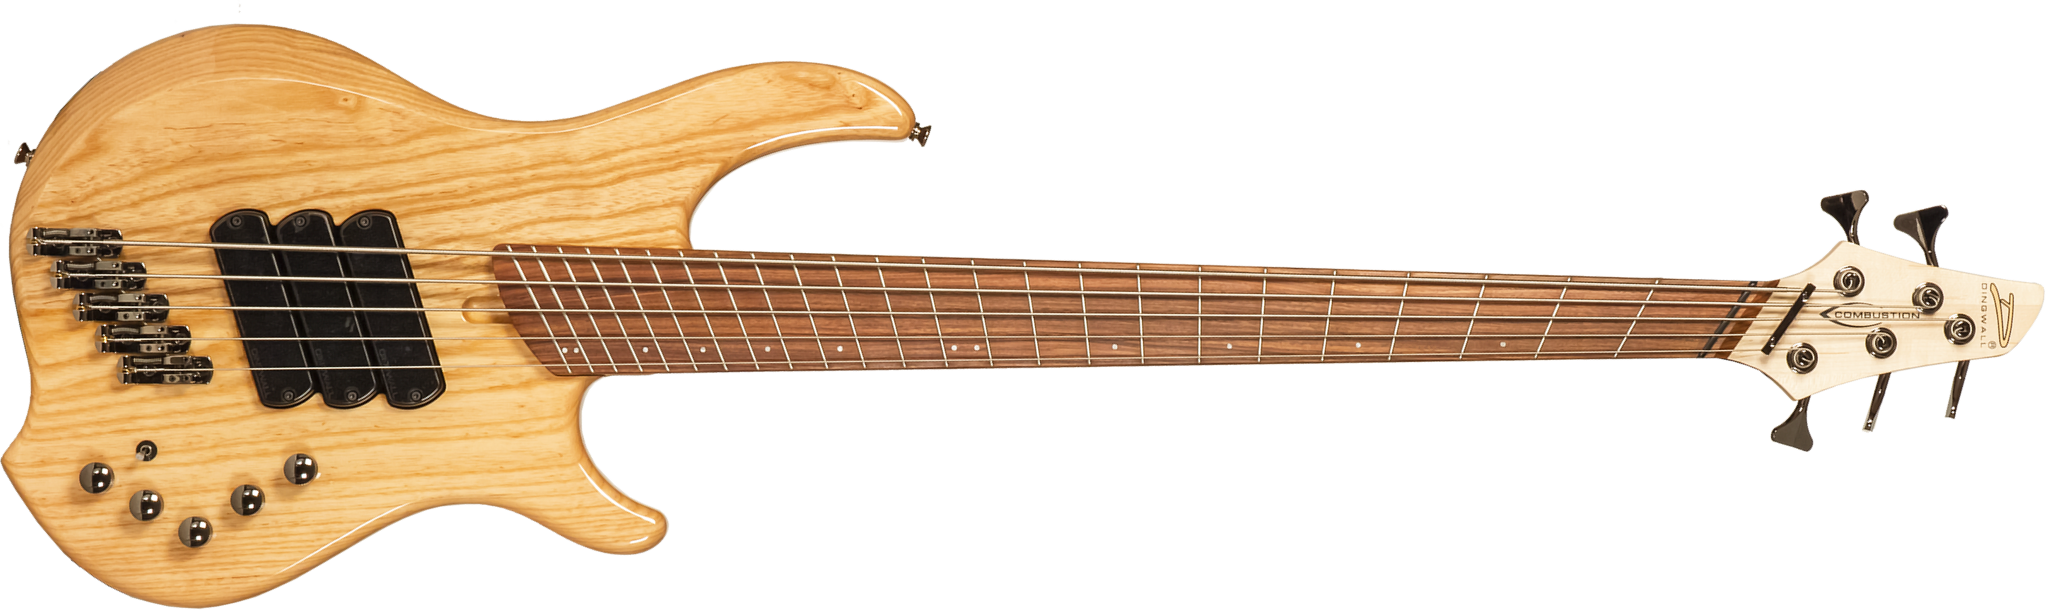 Dingwall Combustion Cb3 5c 3pu Active Pf - Natural Gloss - Solid body electric bass - Main picture